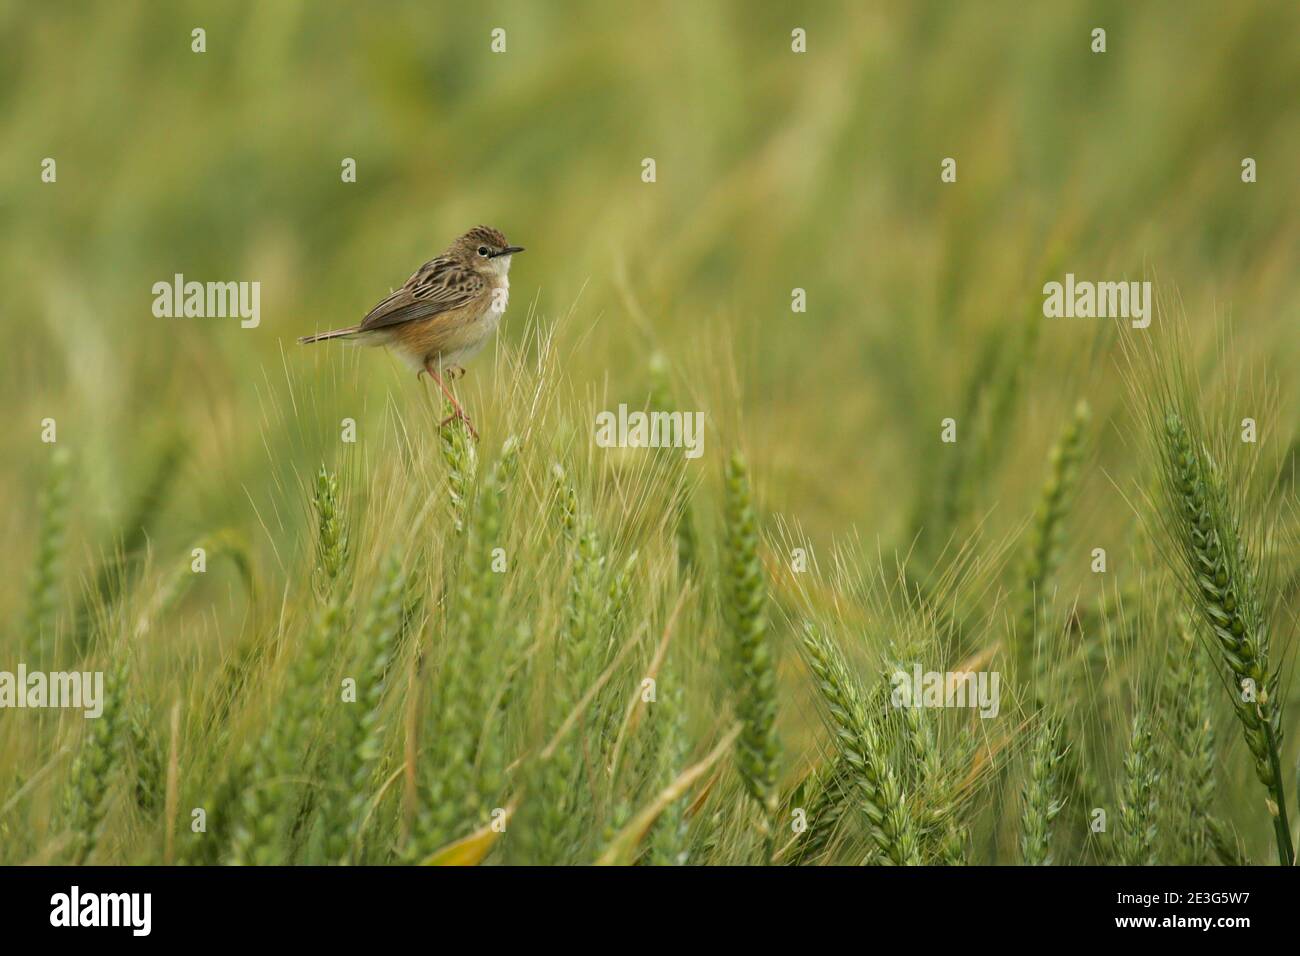 Zitting Cisticola (Cisticola juncidis) adult sitting on ears of grain in cereal field, Andalusia, Spain Stock Photo